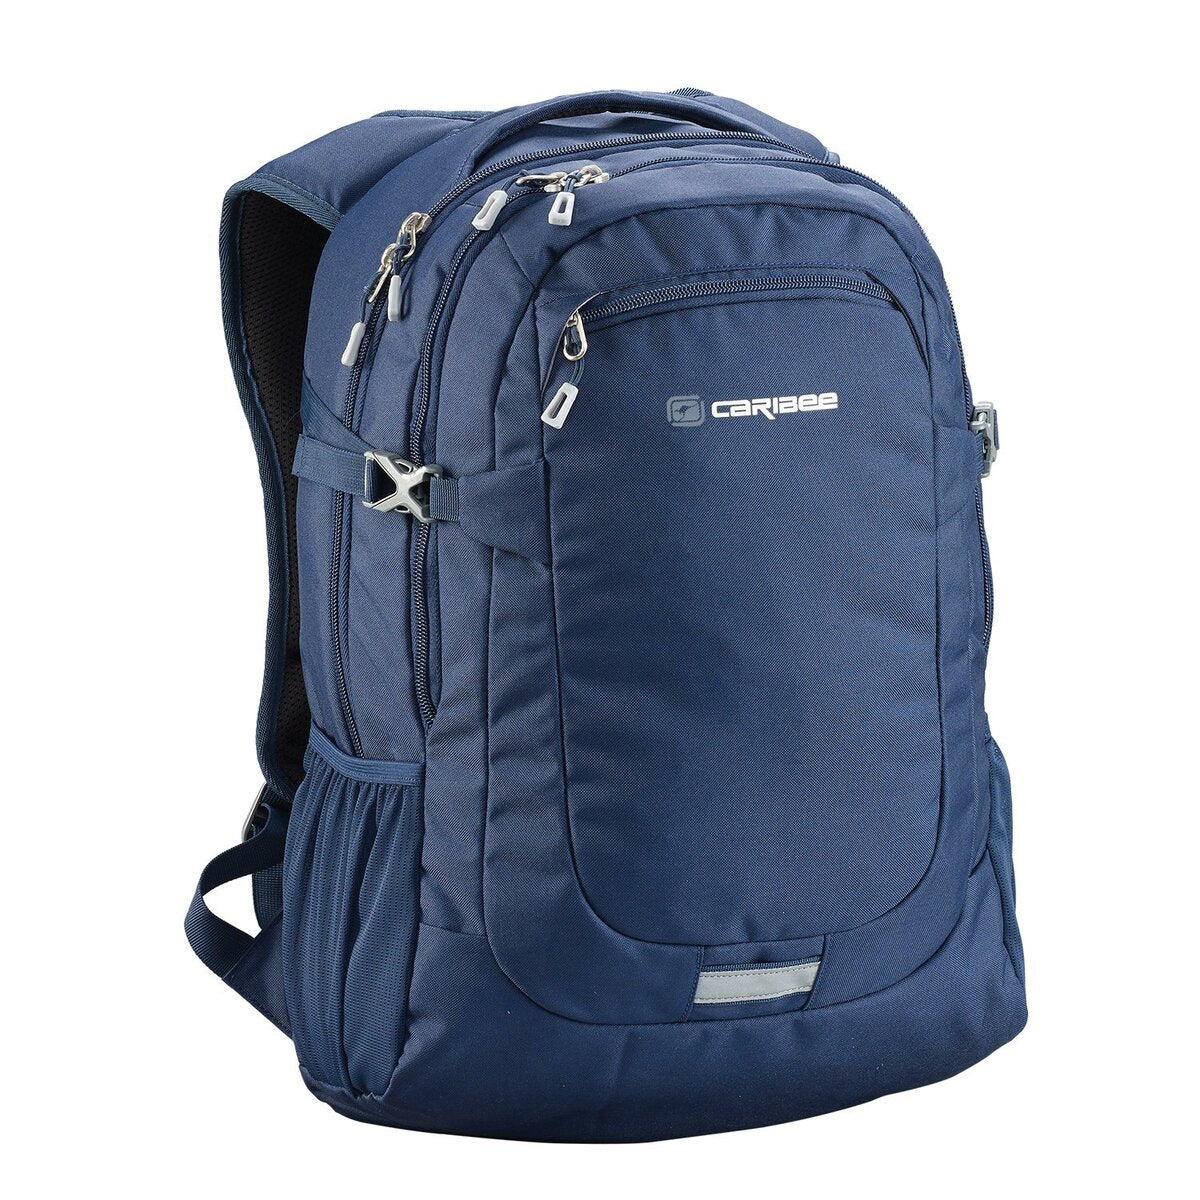 Caribee Fast Track 75 Review | Buy Online | Travel Gear Reviews